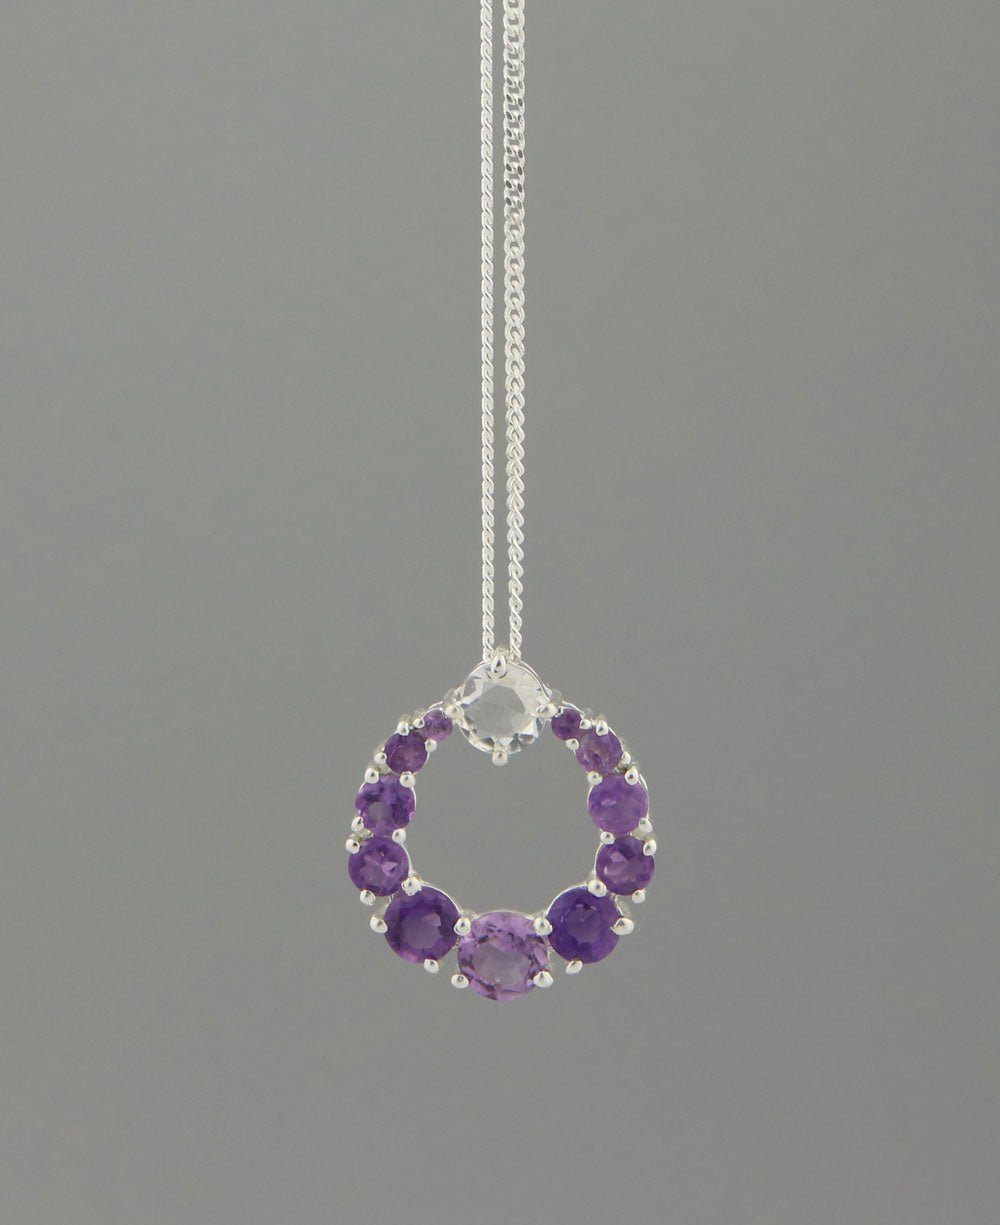 Amethyst and Clear Quartz Sterling Pendant Necklaces - Amethyst